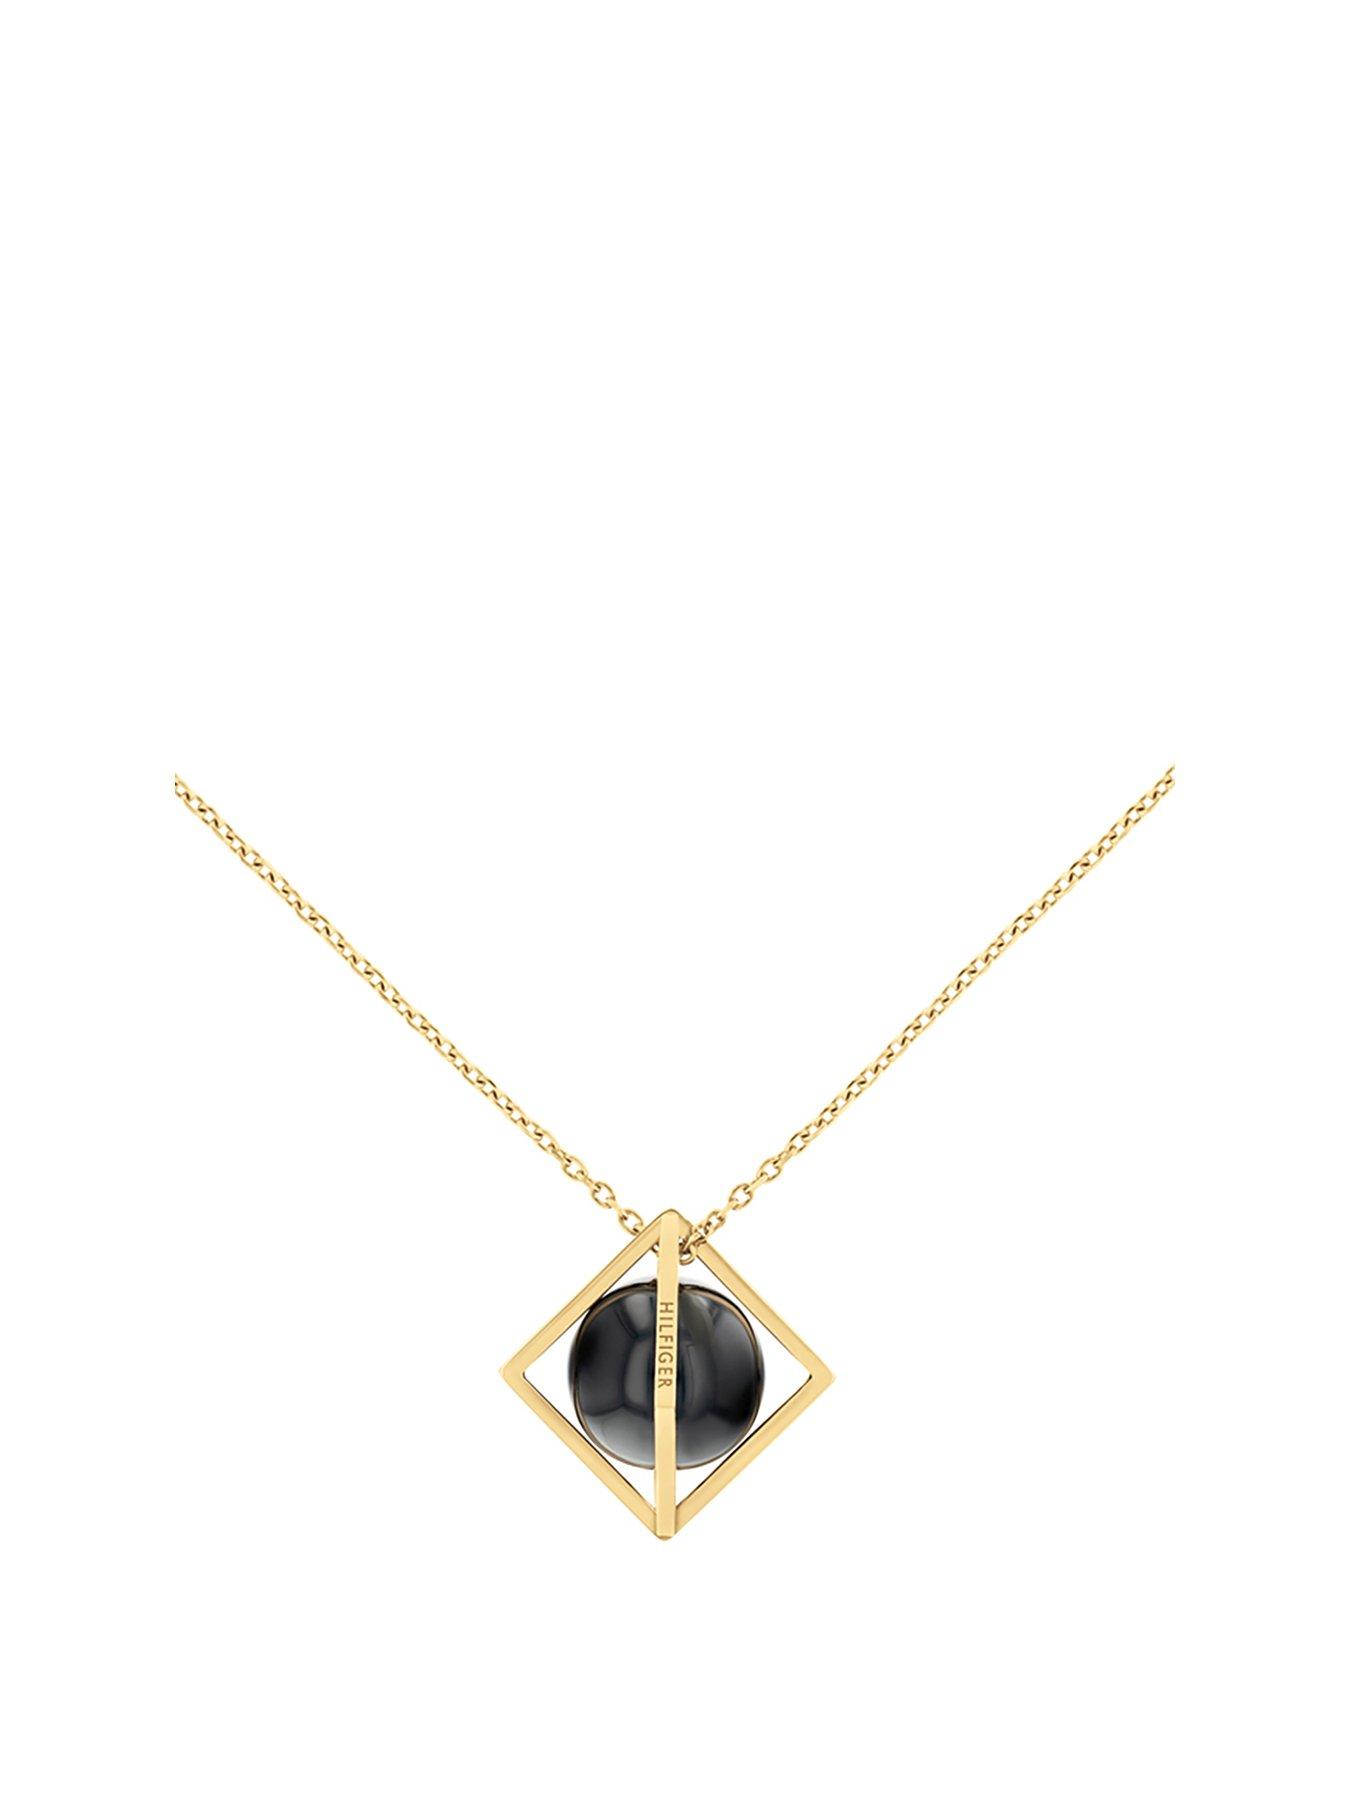 Black Spinel and Gold 35 Necklace - Element 79 Contemporary Jewelry